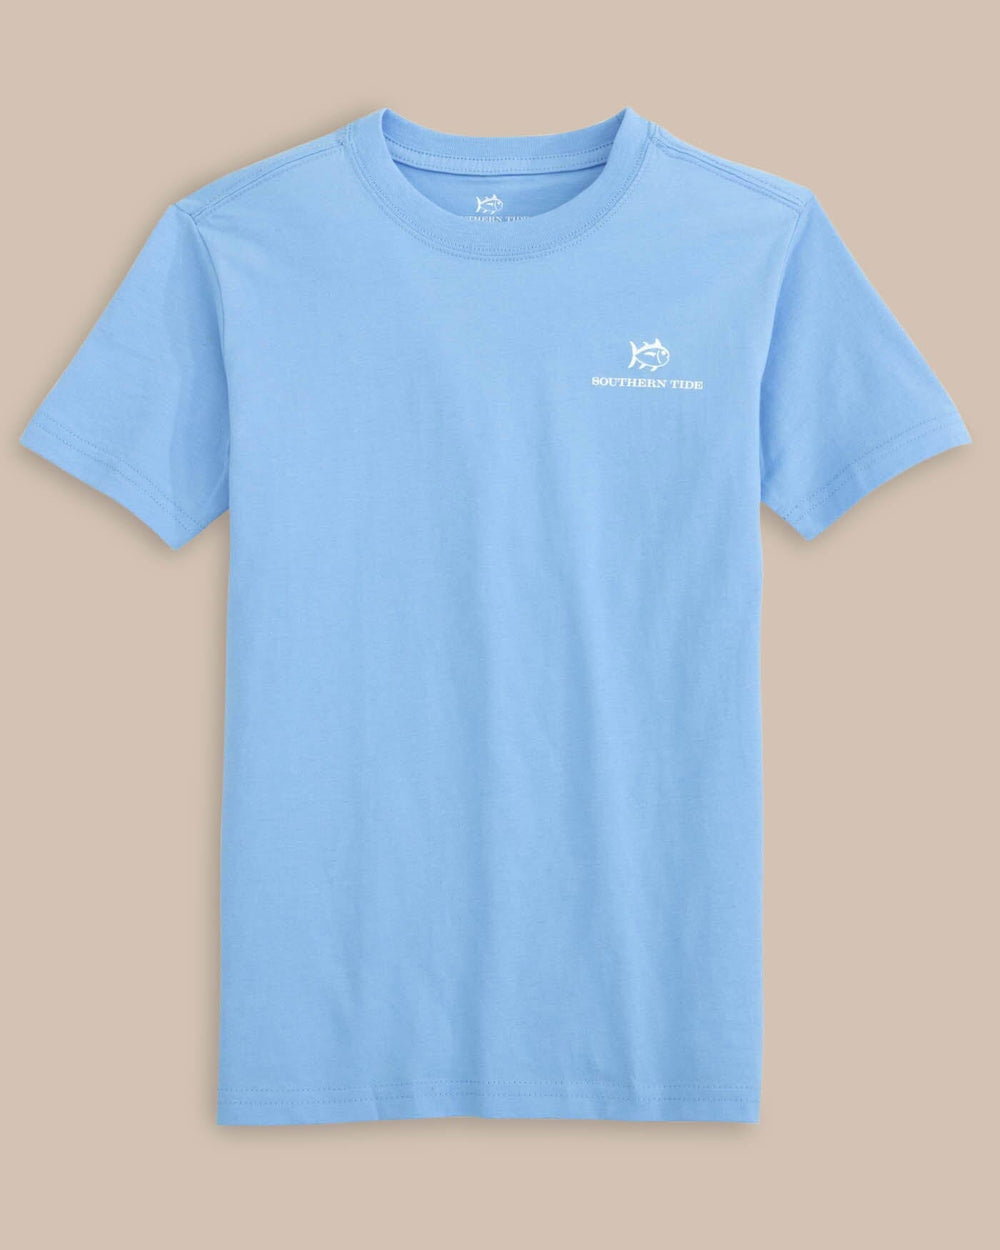 The front view of the Southern Tide Youth Skipping Jacks Fill T-Shirt by Southern Tide - Ocean Channel